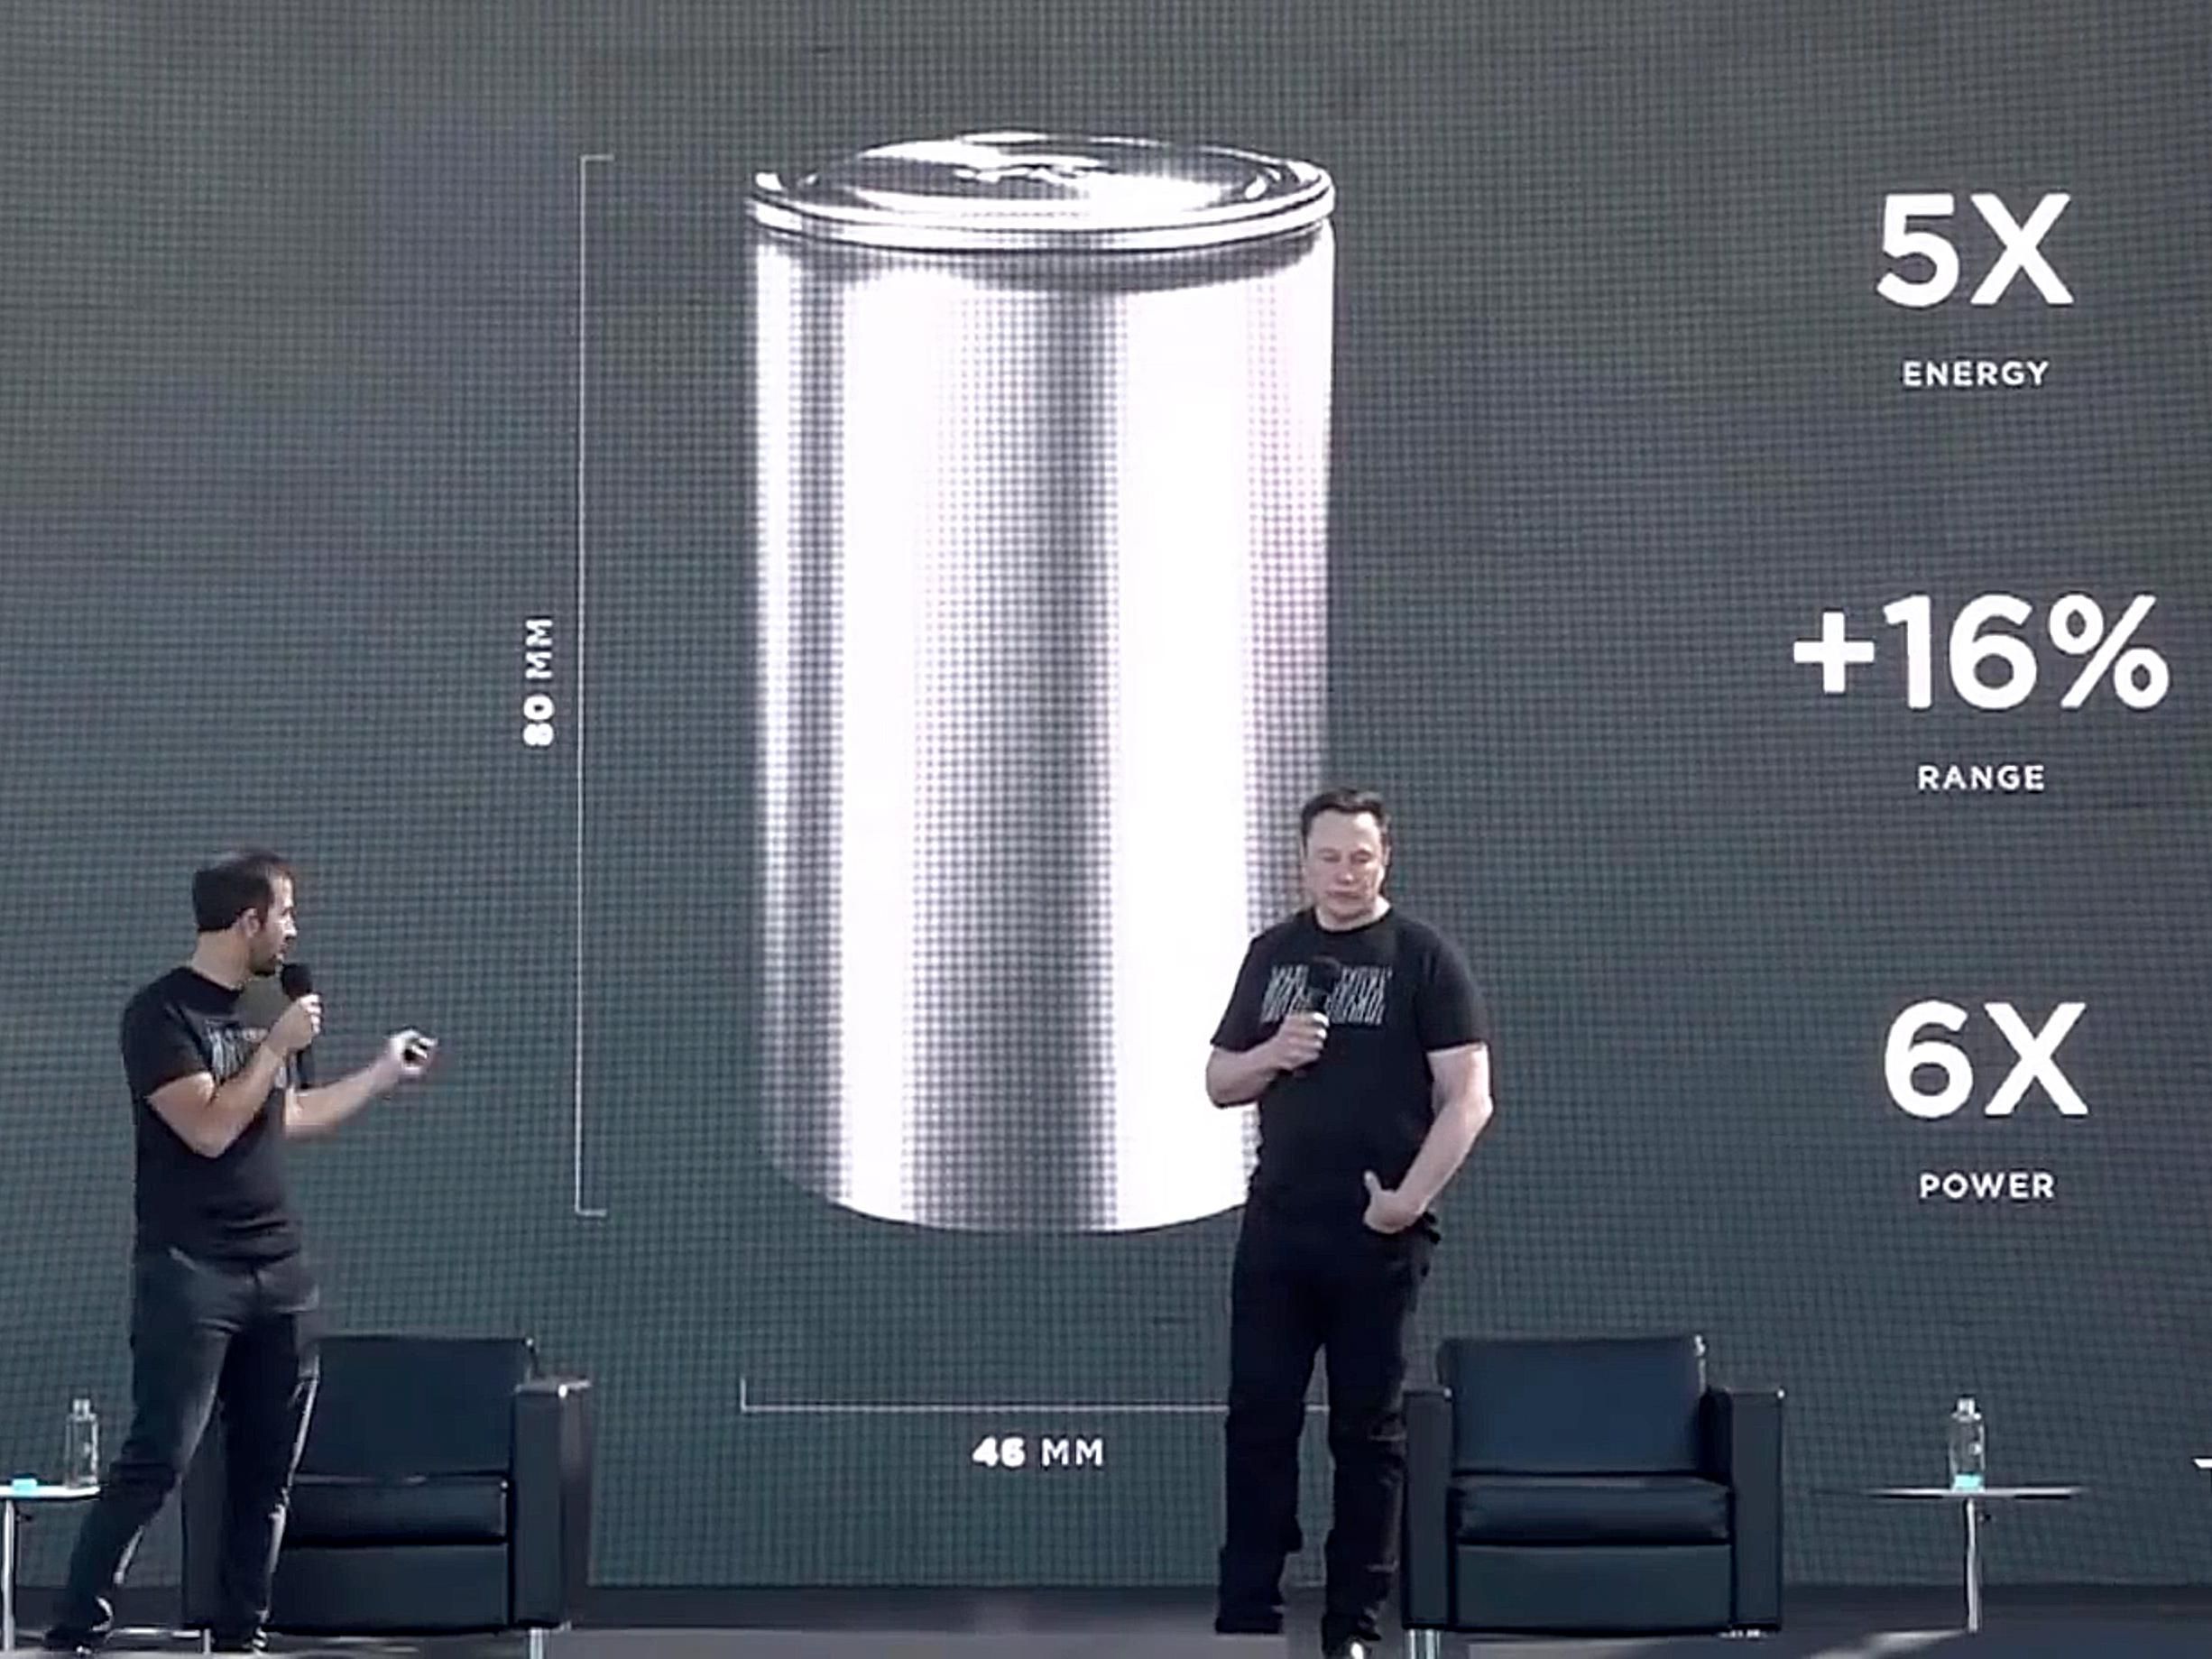 Two men with microphones stand on stage. A large monitor behind them shows a cylindrical battery labeled as 80mm high and 46 mm wide.